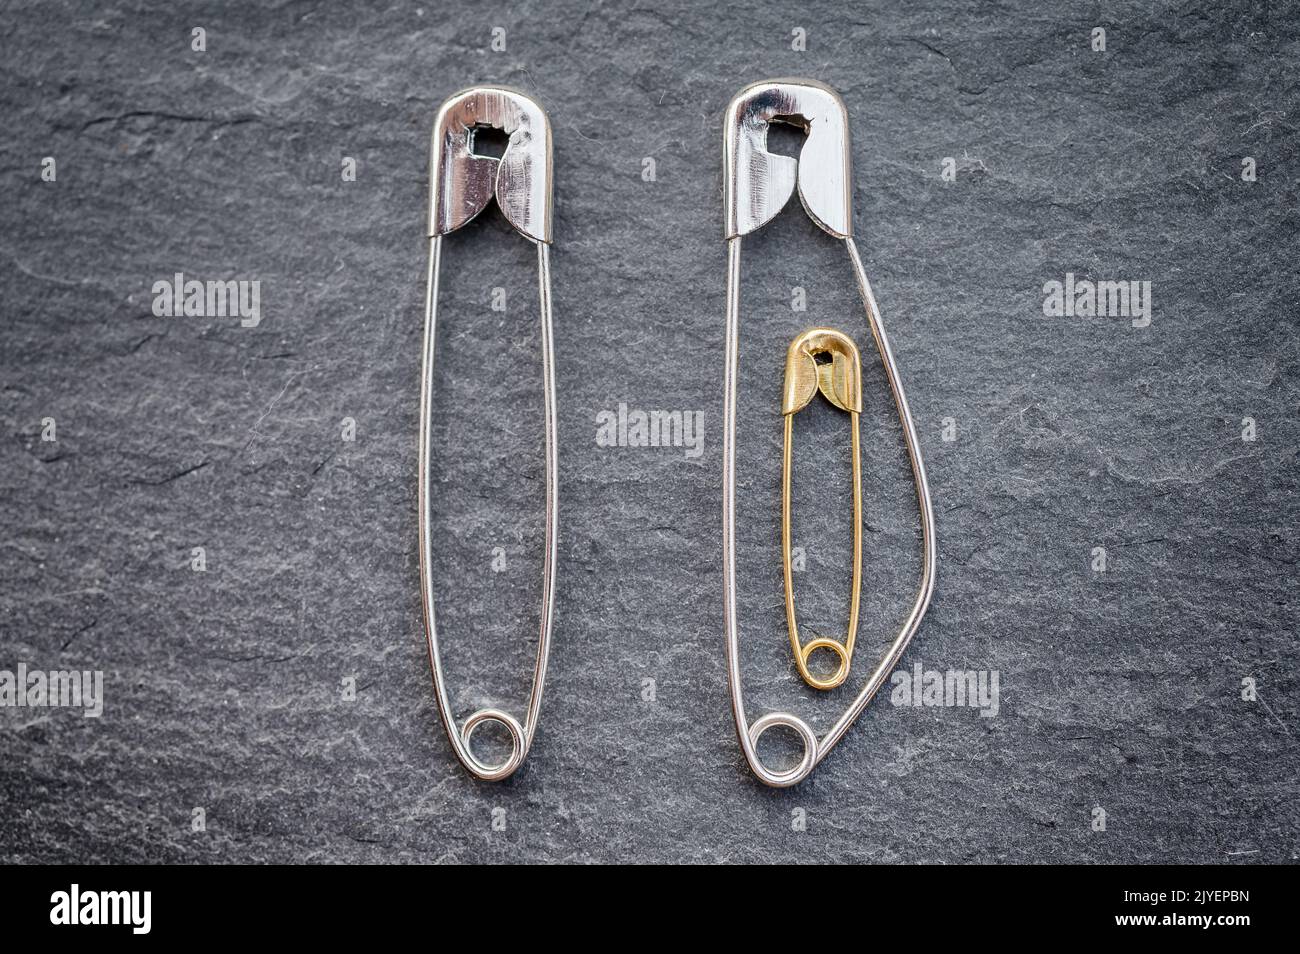 Pregnancy in a relationship depicted with safety pins Stock Photo